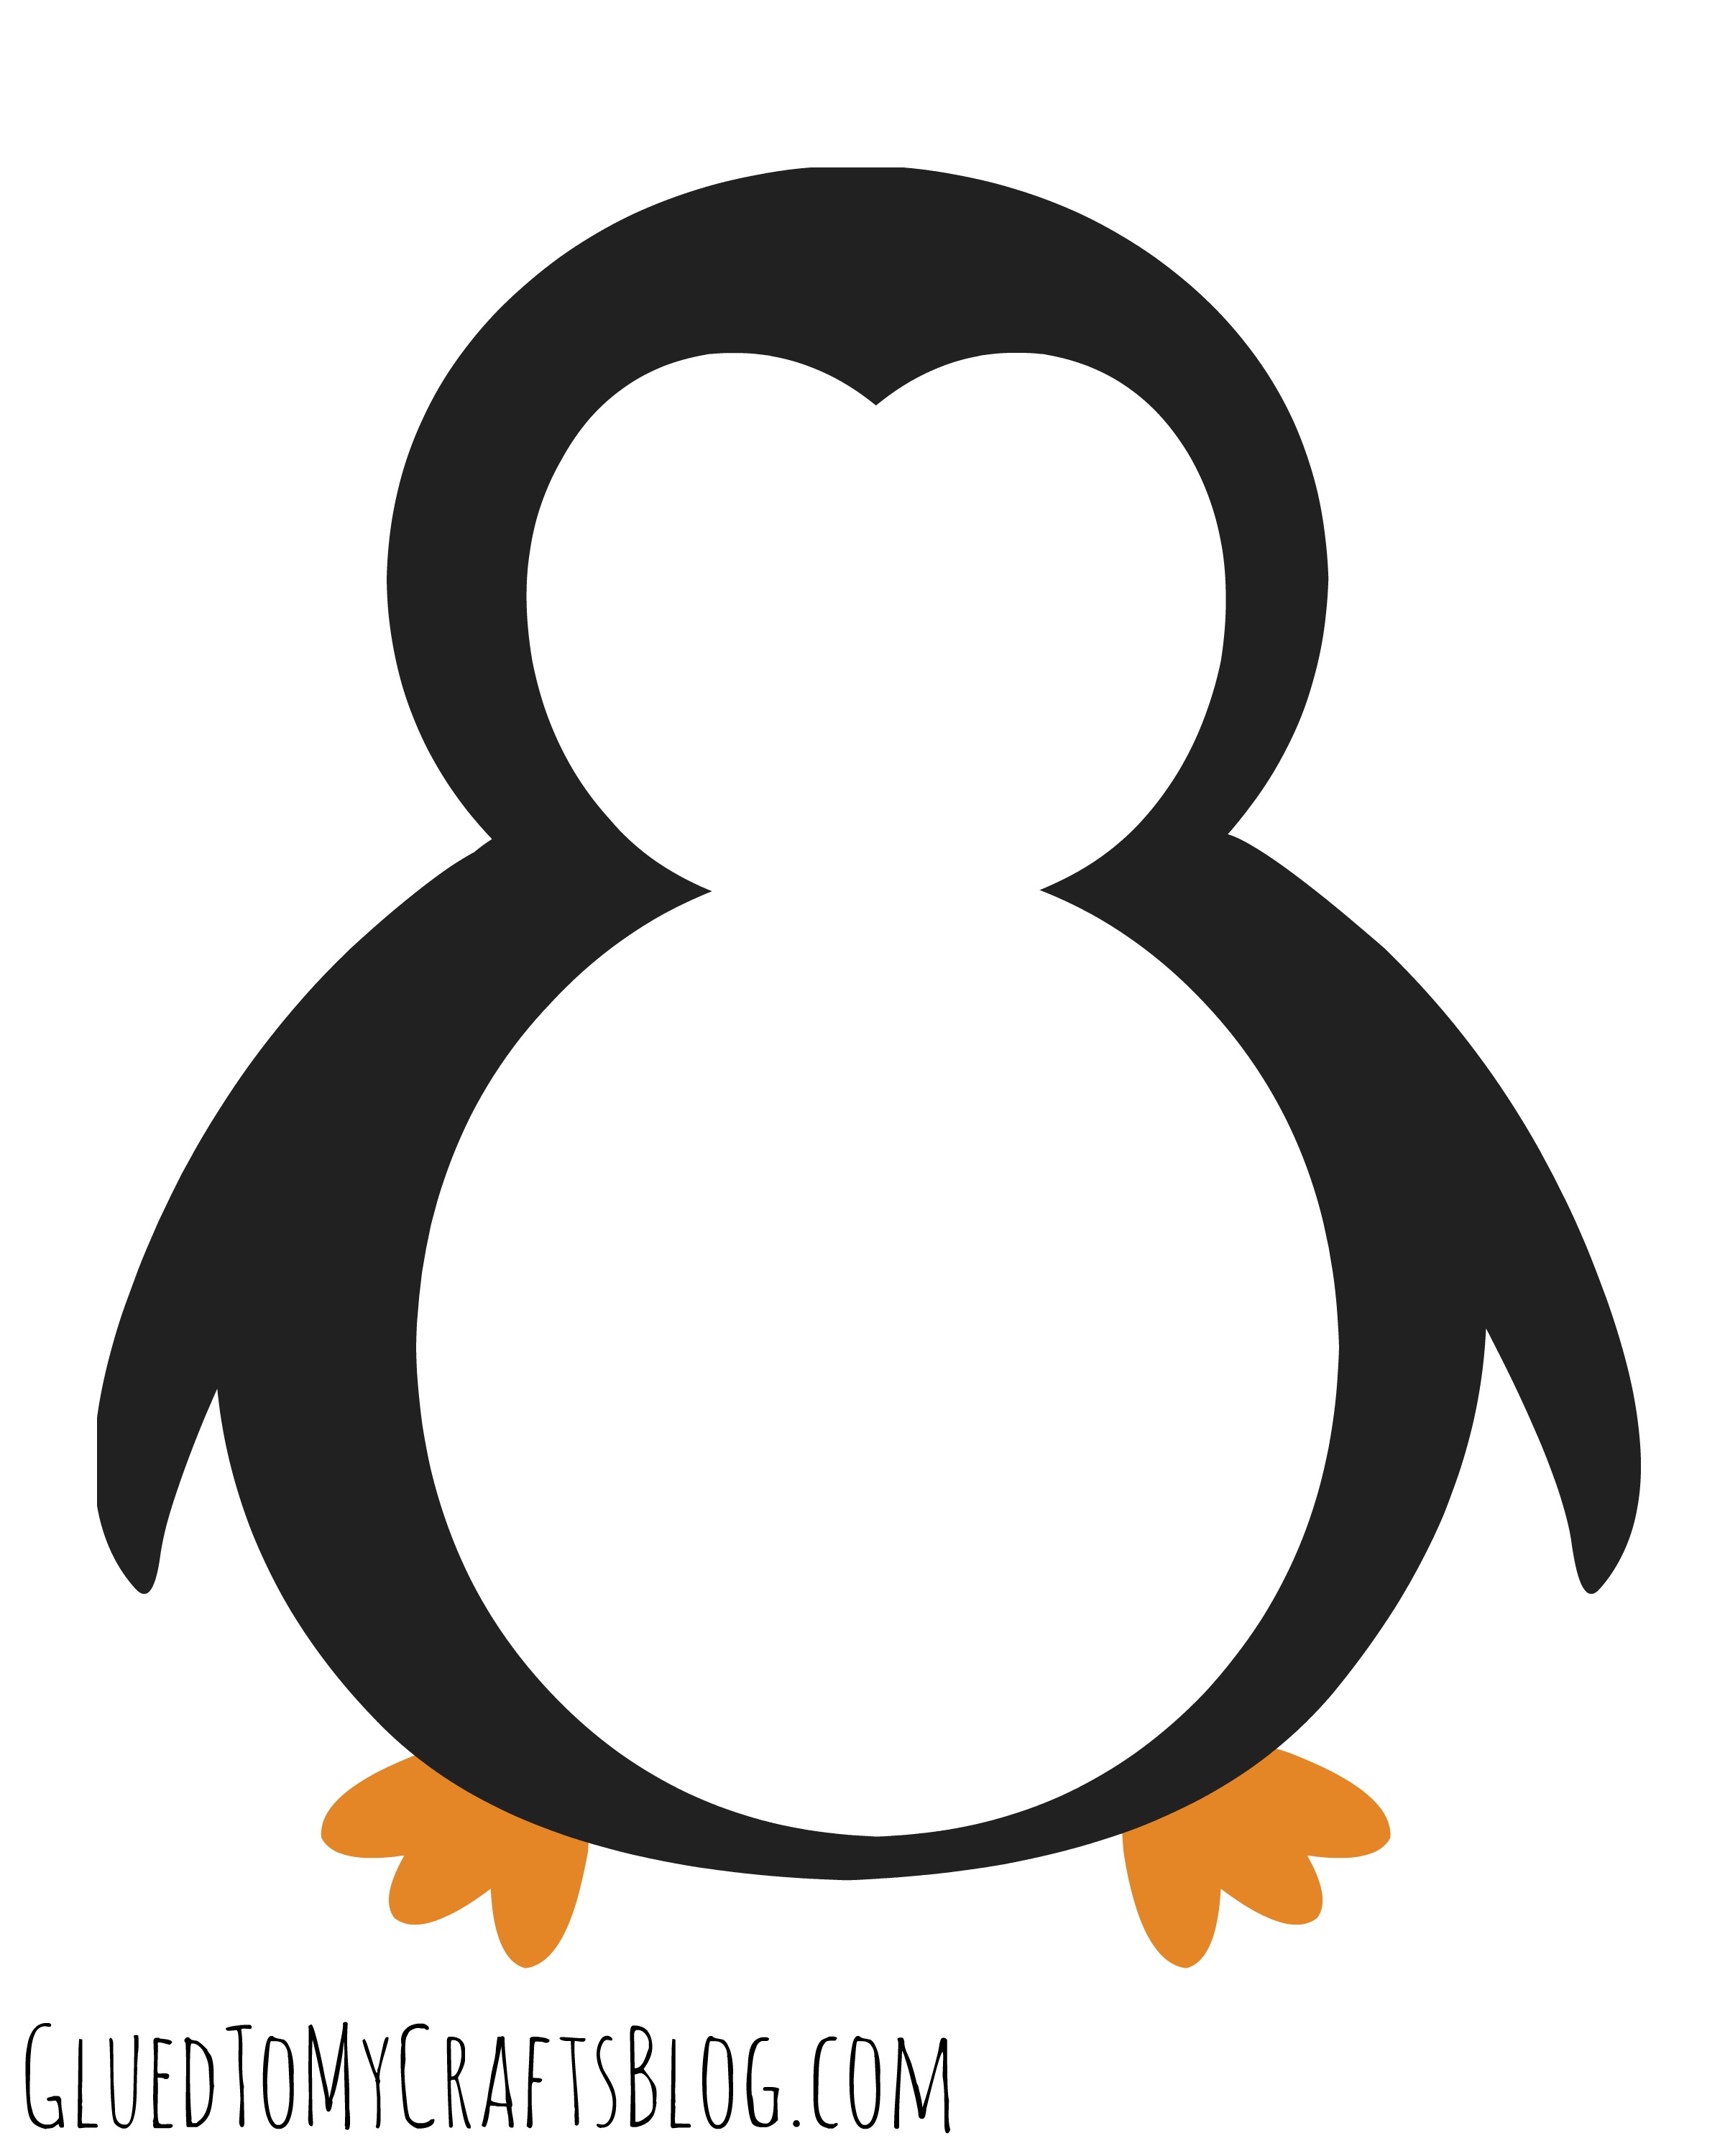 penguins-printable-free-download-on-clipartmag